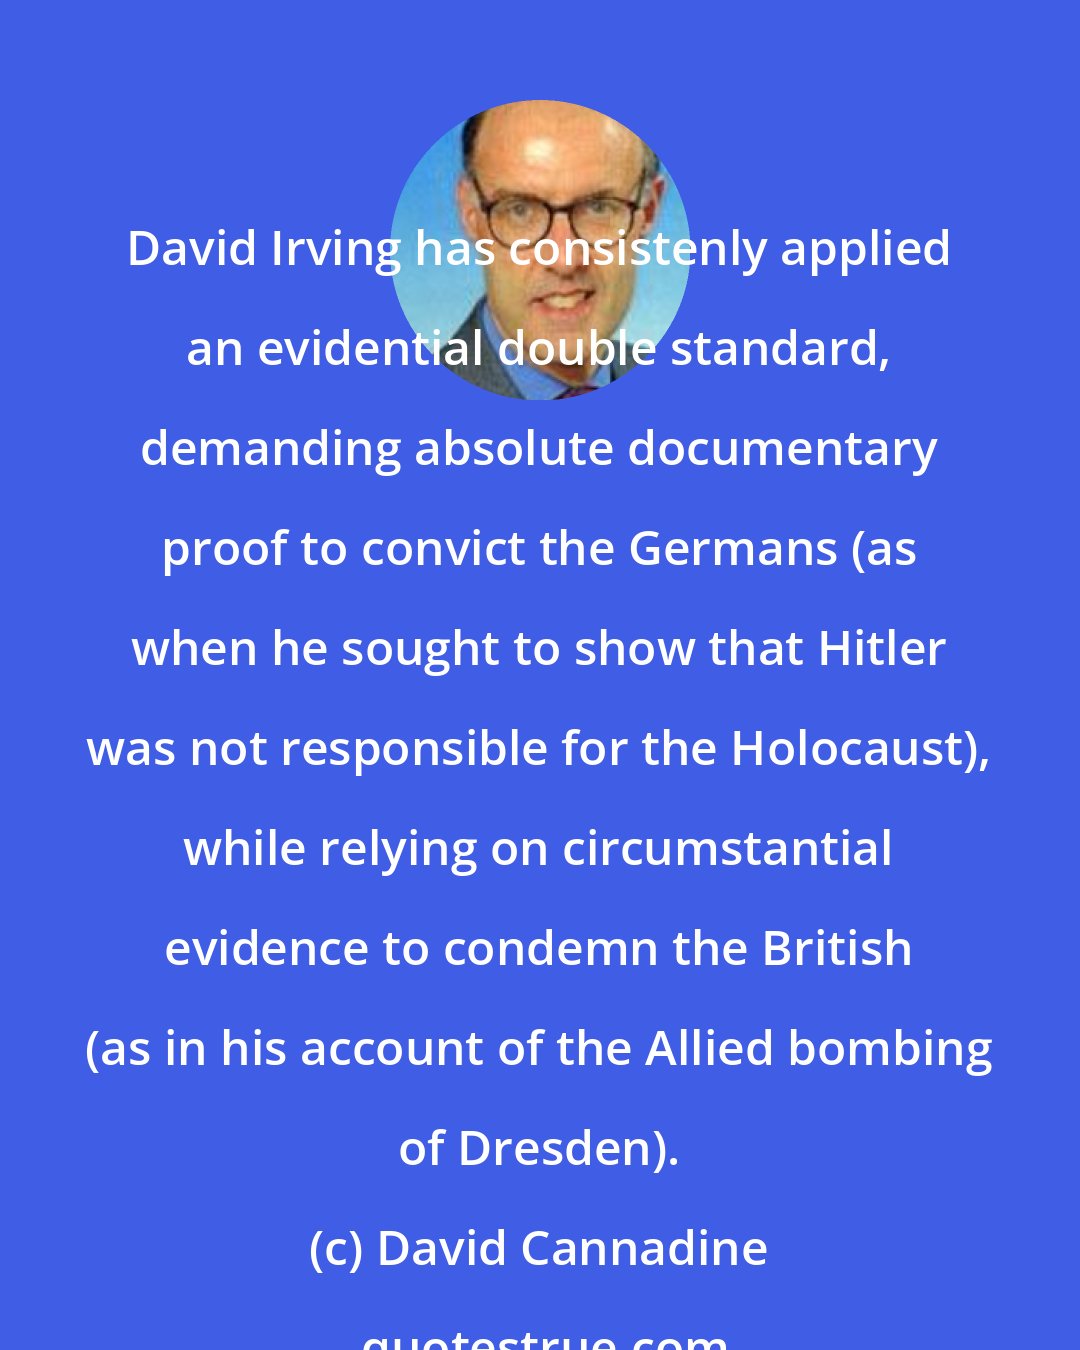 David Cannadine: David Irving has consistenly applied an evidential double standard, demanding absolute documentary proof to convict the Germans (as when he sought to show that Hitler was not responsible for the Holocaust), while relying on circumstantial evidence to condemn the British (as in his account of the Allied bombing of Dresden).